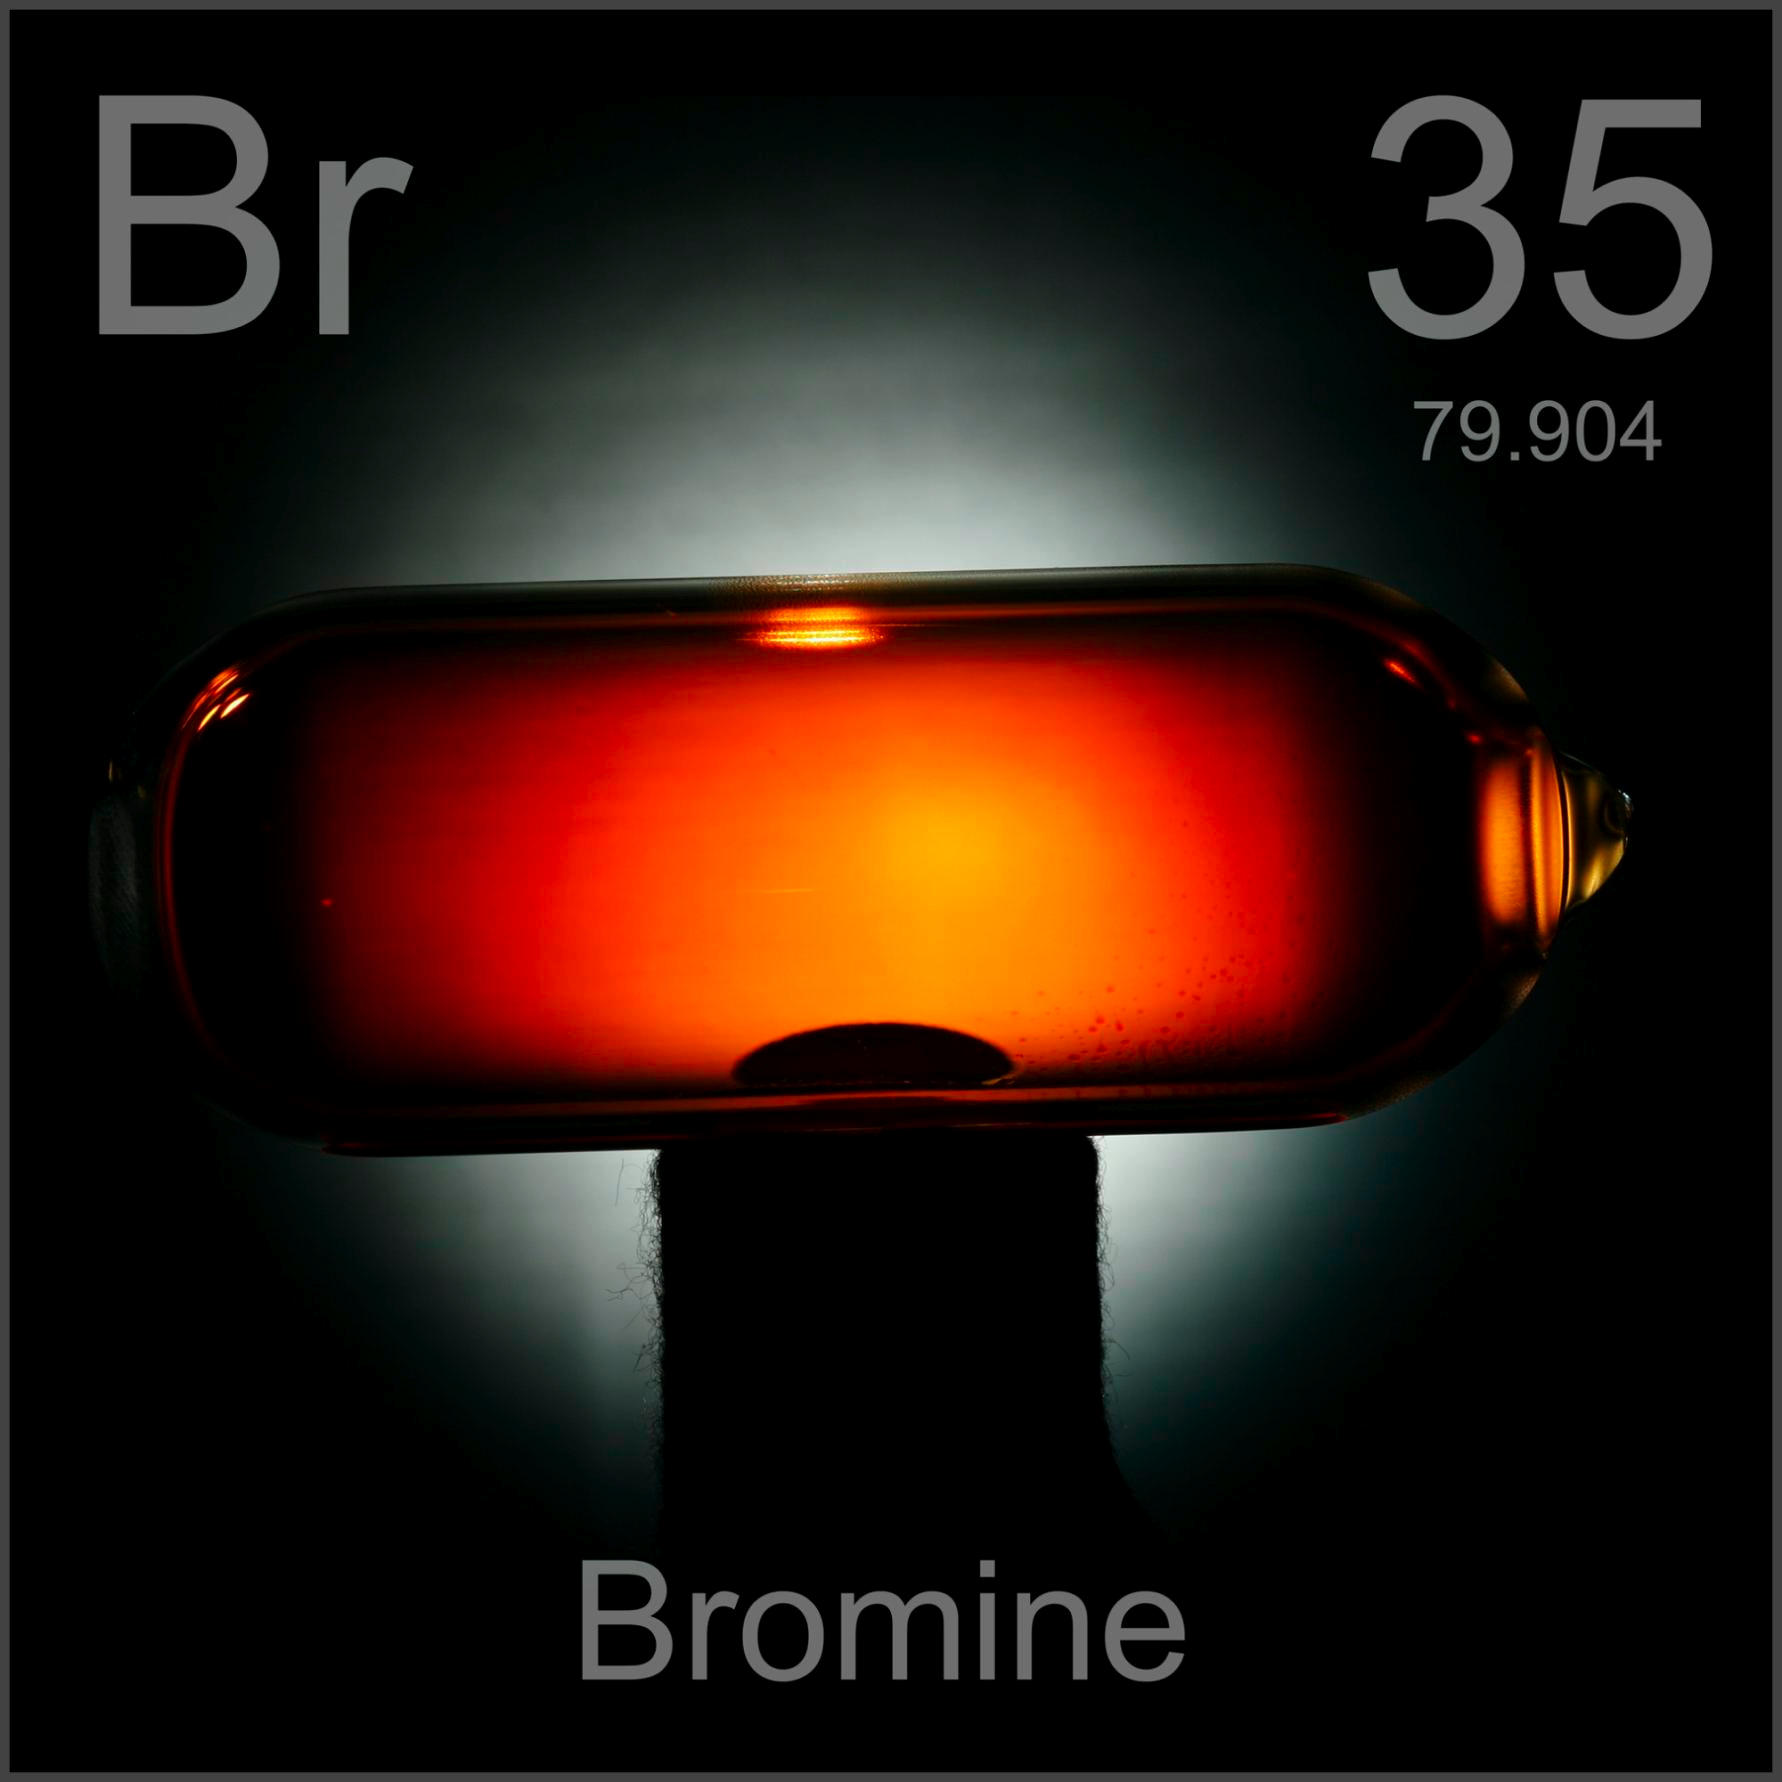 Facts, pictures, stories about the element Bromine in the Periodic Table